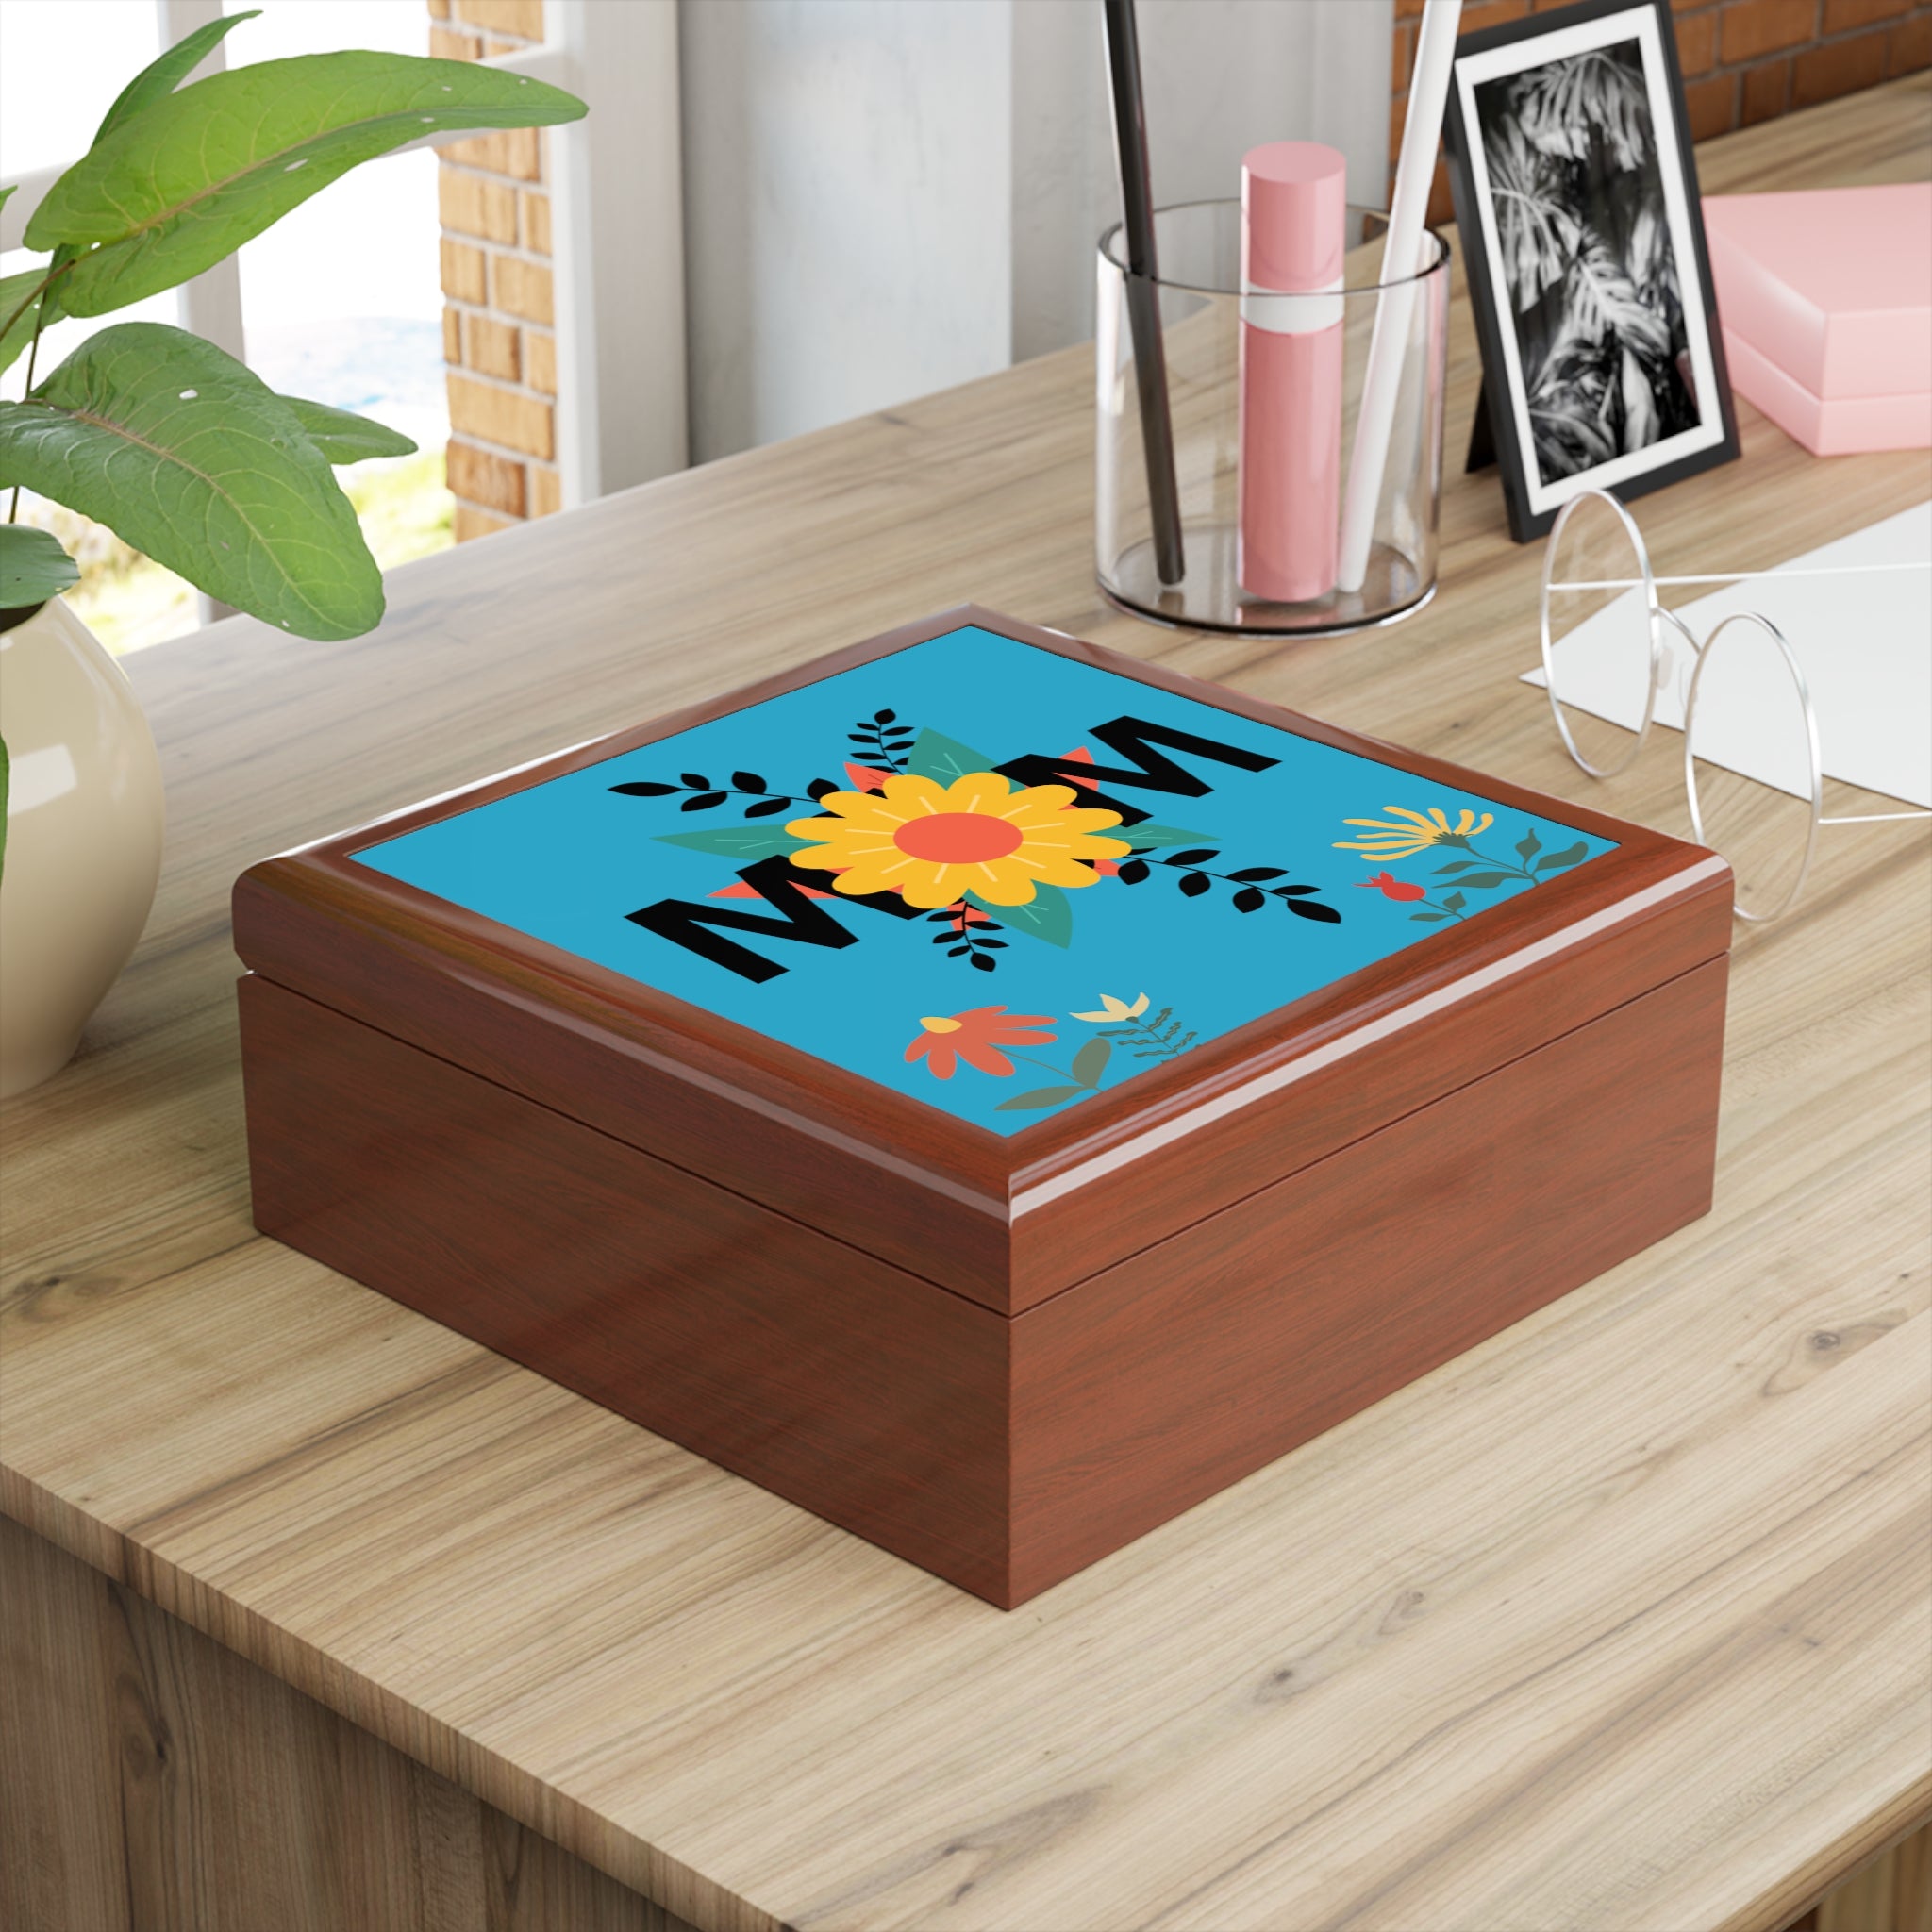 Floral Pattern Mom Design Jewelry Box Perfect for Mother's Day Gift